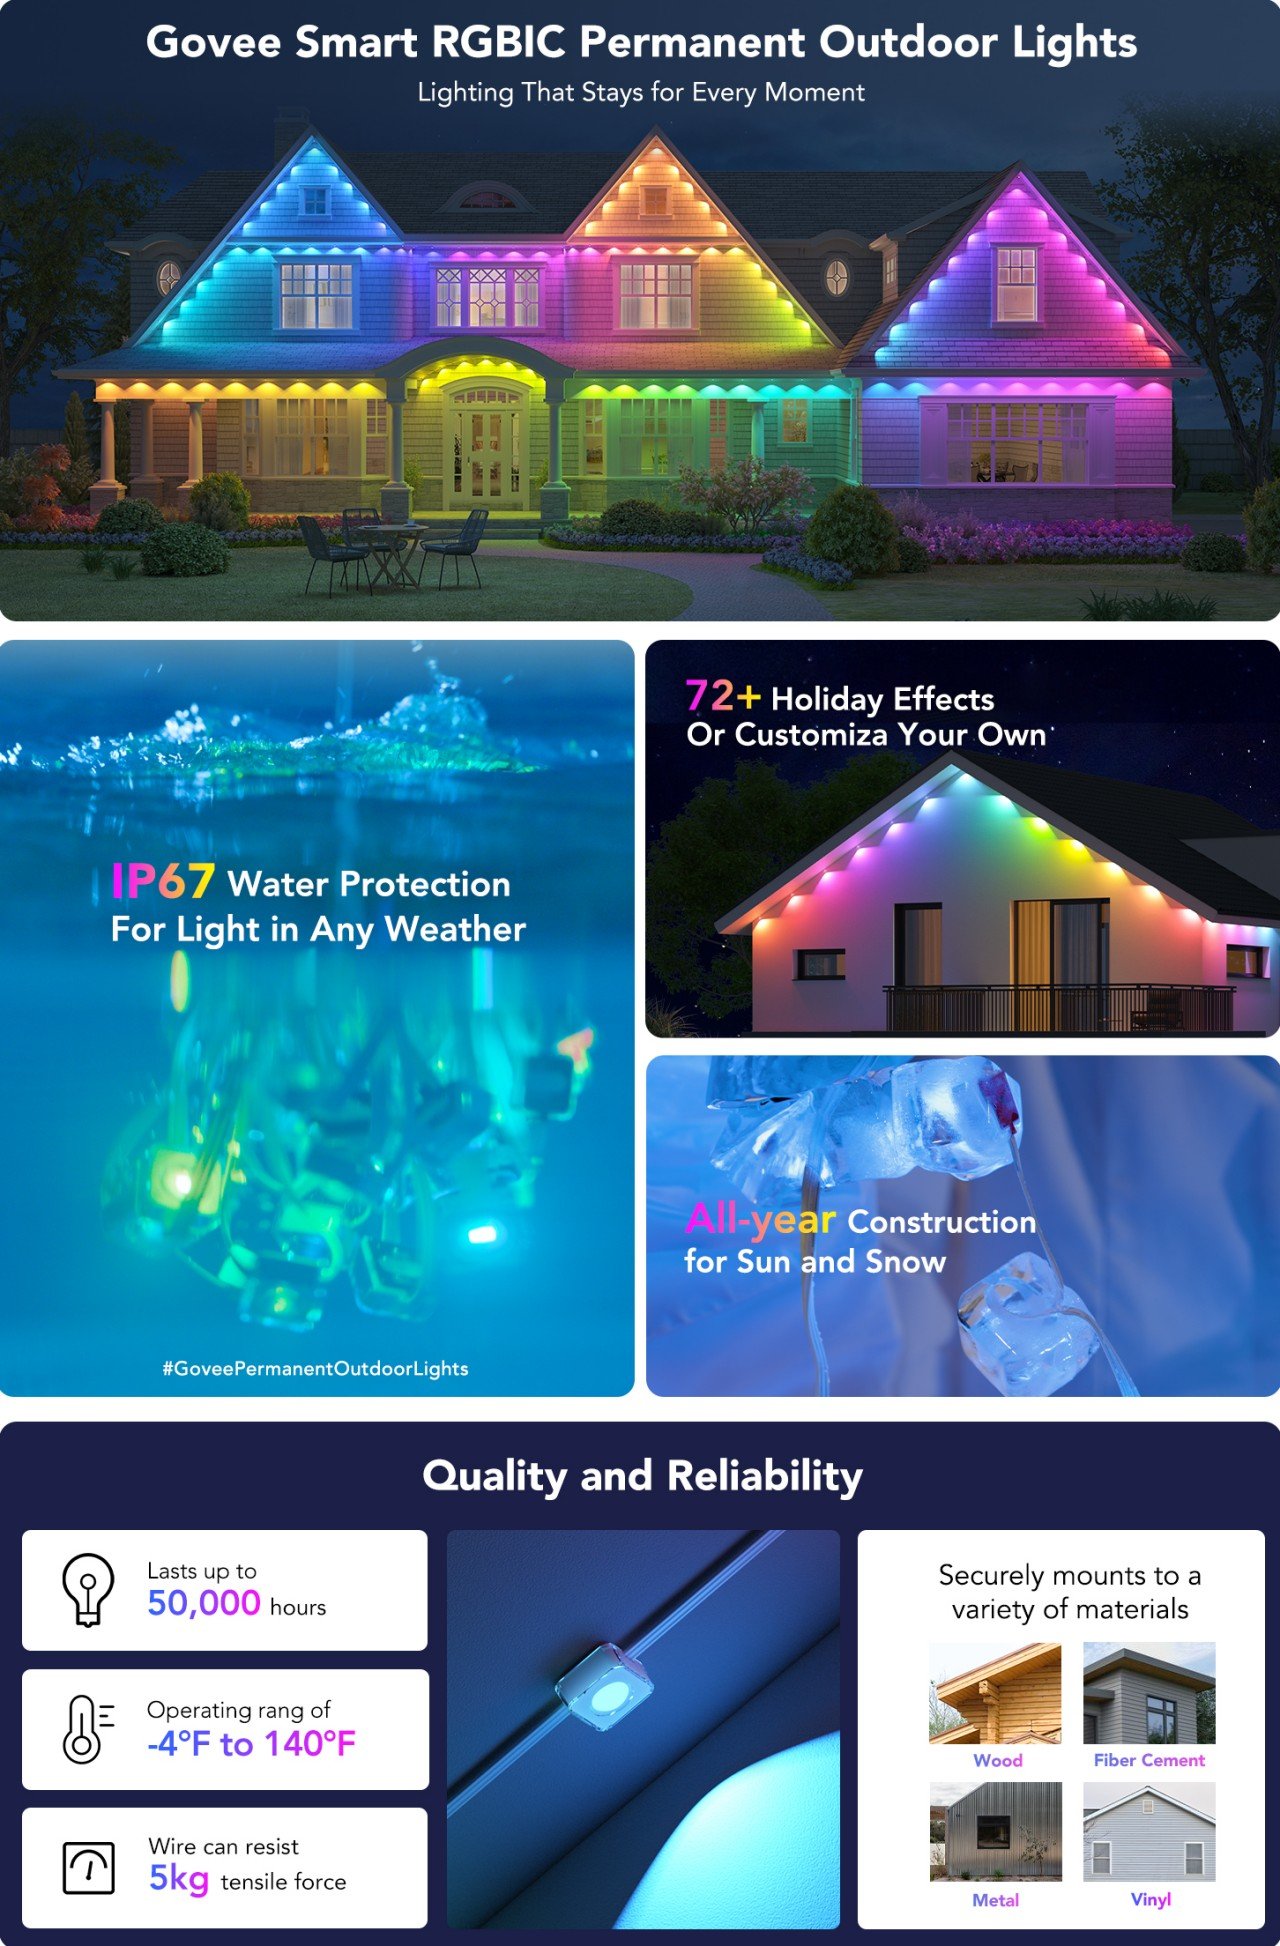 https://www.yankodesign.com/images/design_news/2023/08/govee-rgbic-permanent-outdoor-lights-review-its-a-holiday-everyday-of-the-year/Infographic.jpg